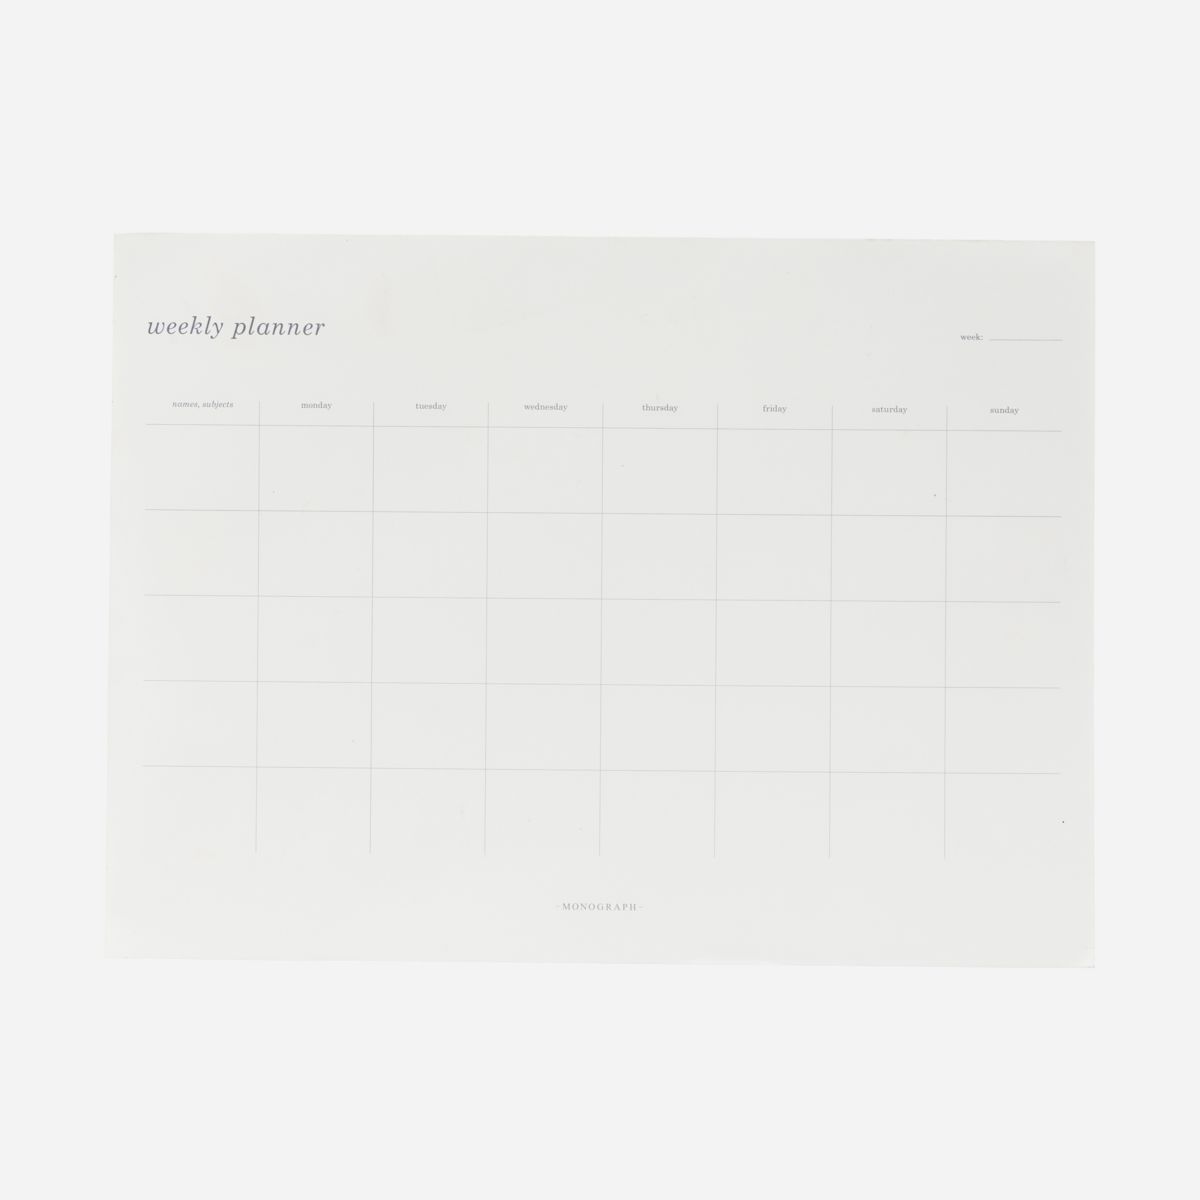 Monograph Weekly Planner